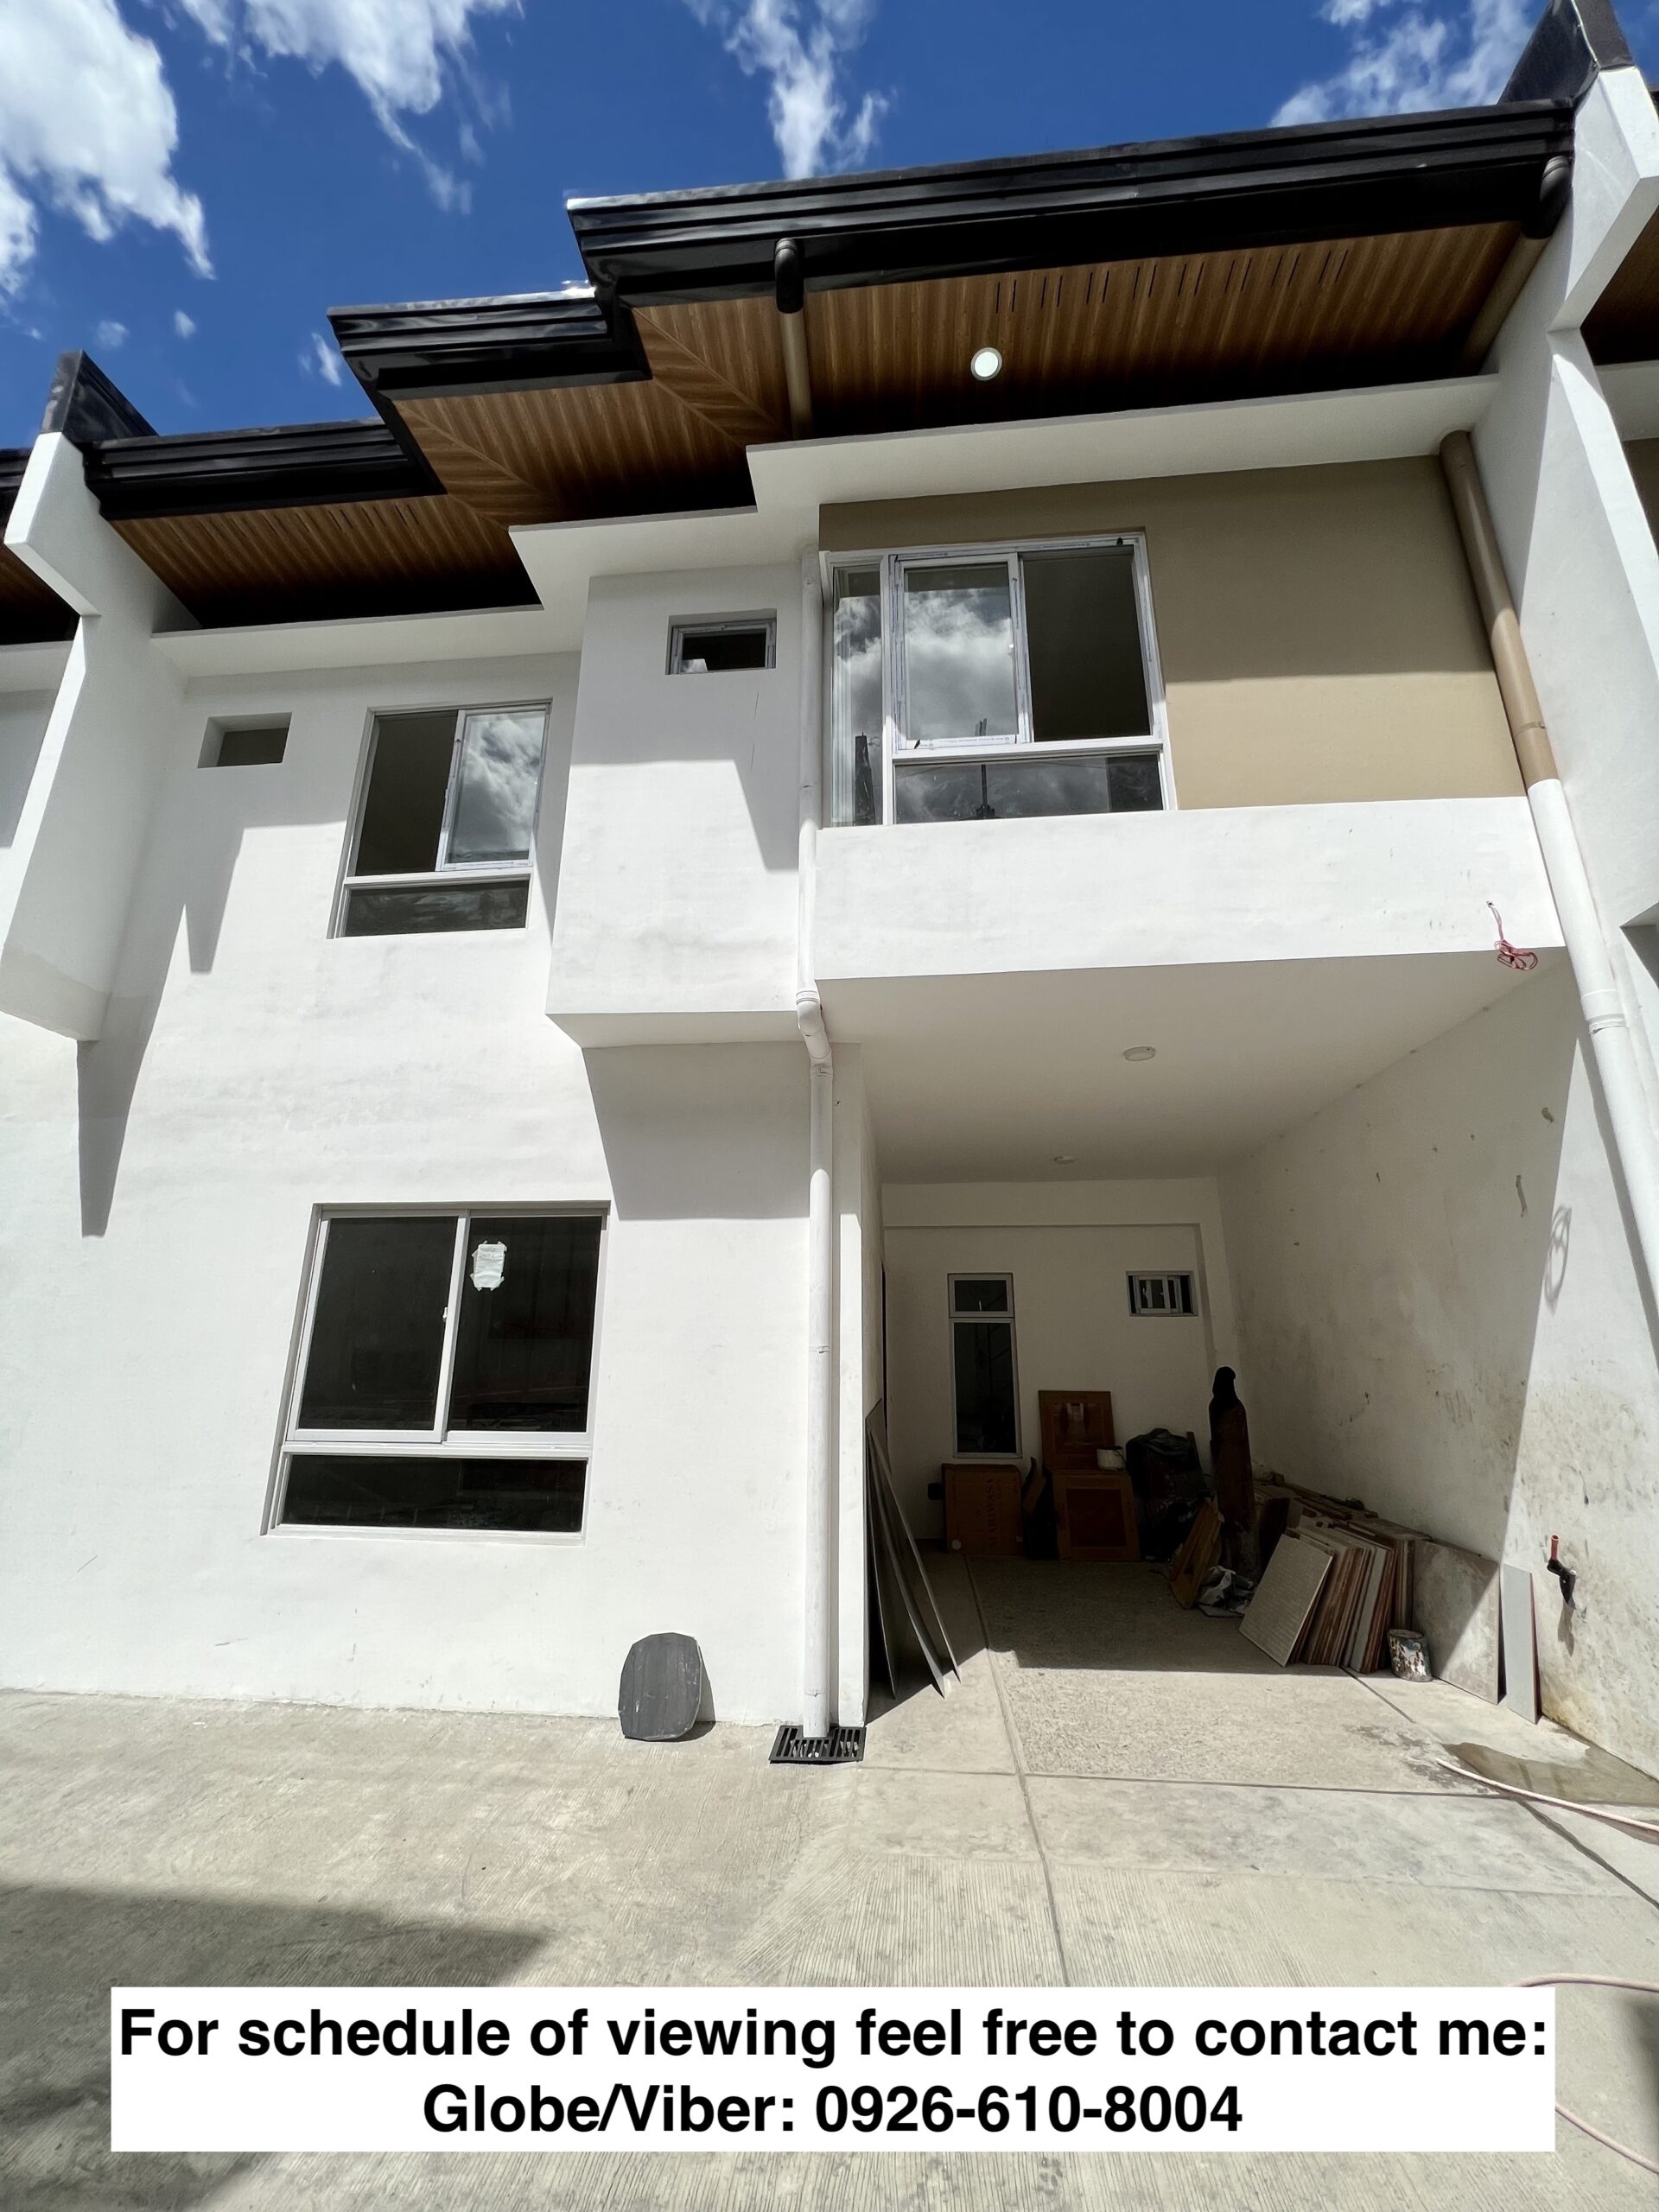 Private: House and Lot For Sale in Quezon City Brandnew 3BR with 2 Parking slot near Dahlia ave,FEU Hospital